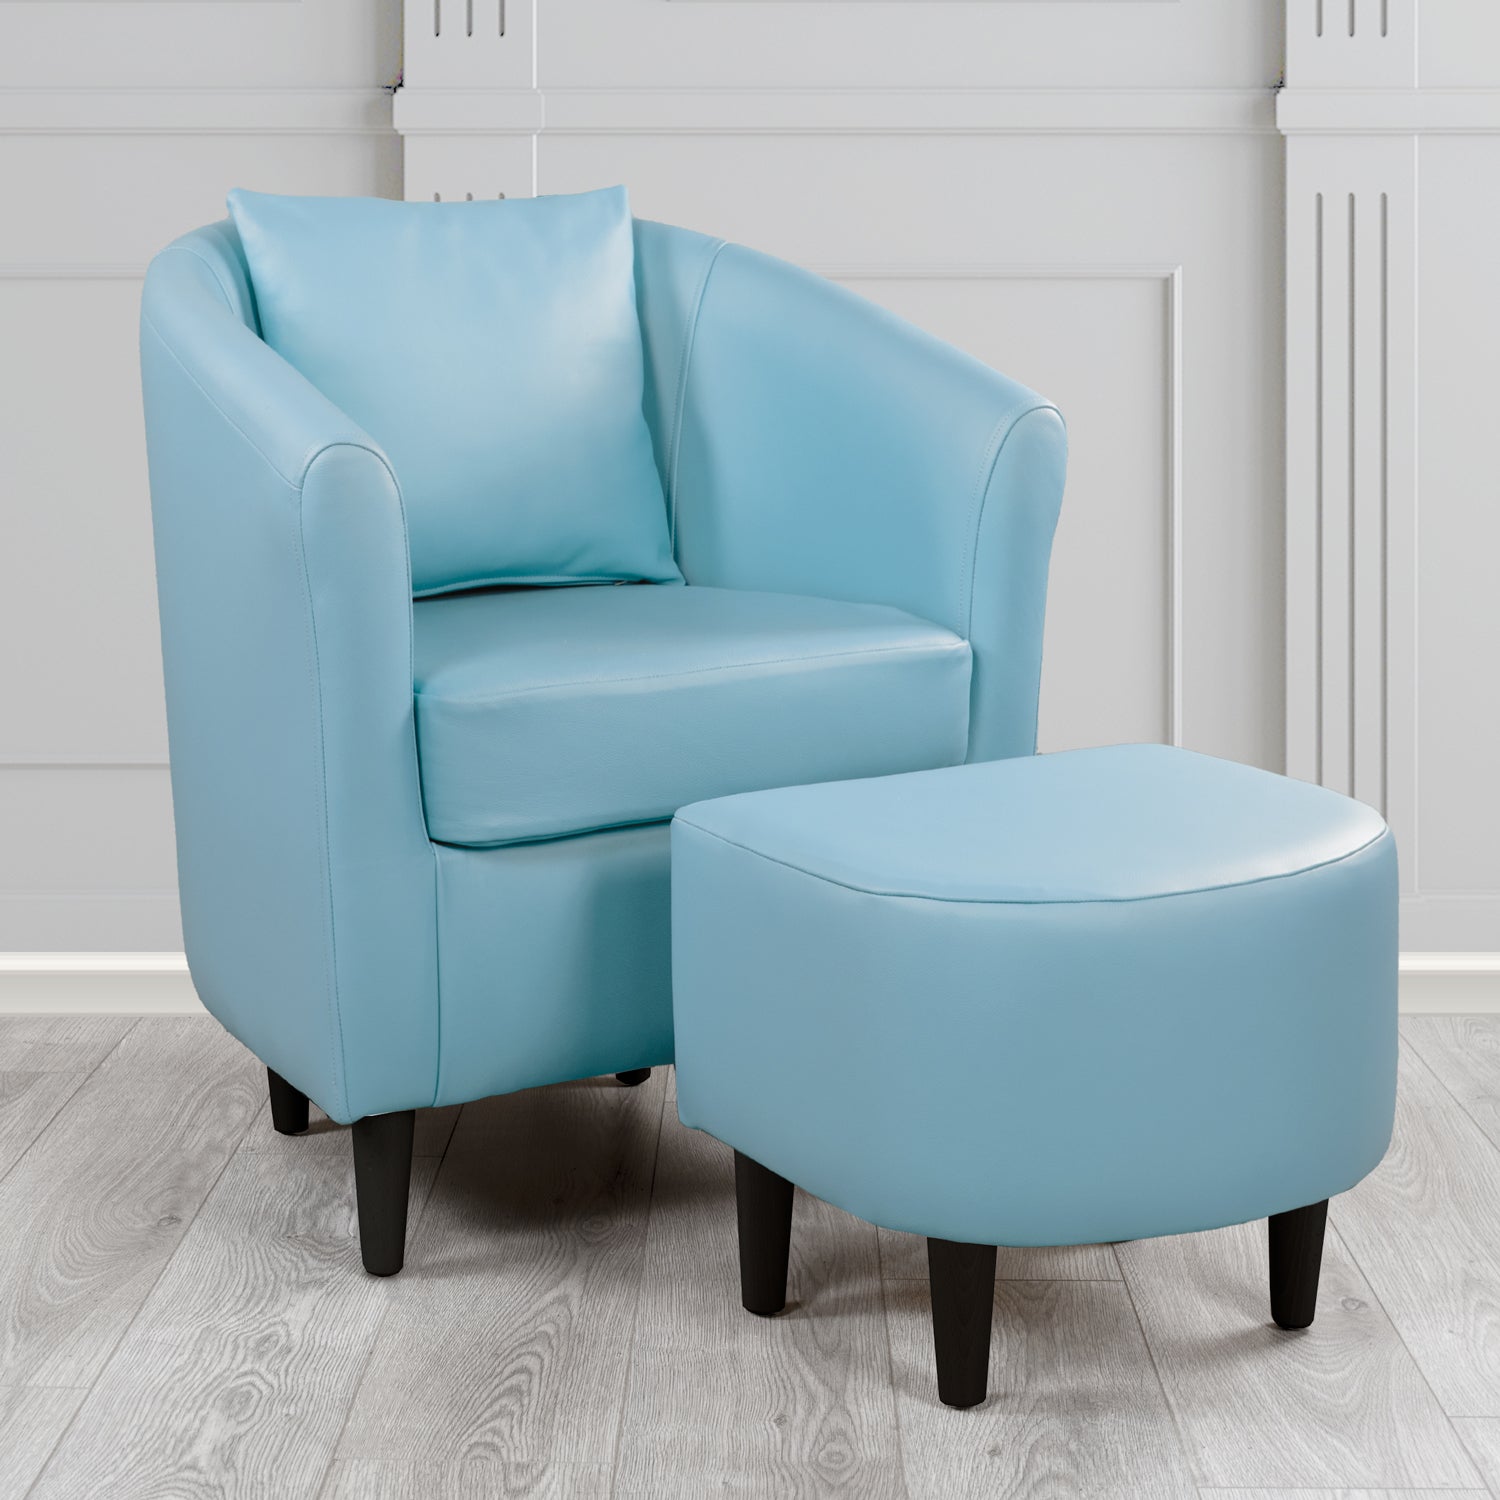 St Tropez Shelly Haze Crib 5 Genuine Leather Tub Chair & Footstool Set With Scatter Cushion (6619500511274)